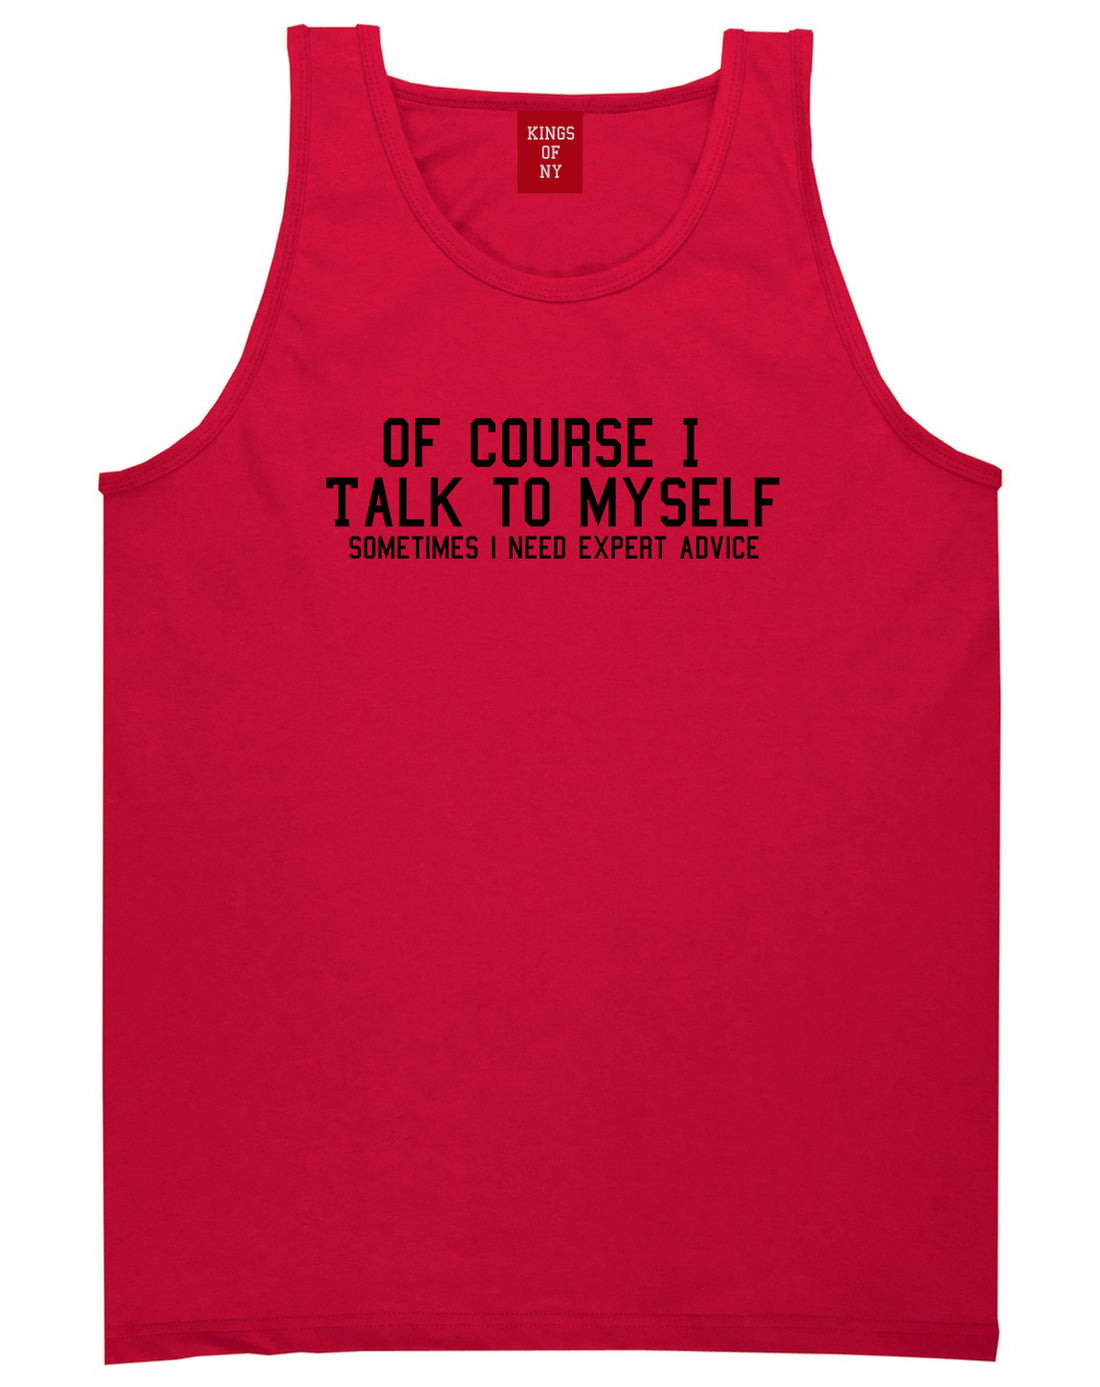 Of Course I Talk To Myself Funny Sarcasm Mens Tank Top T-Shirt Red